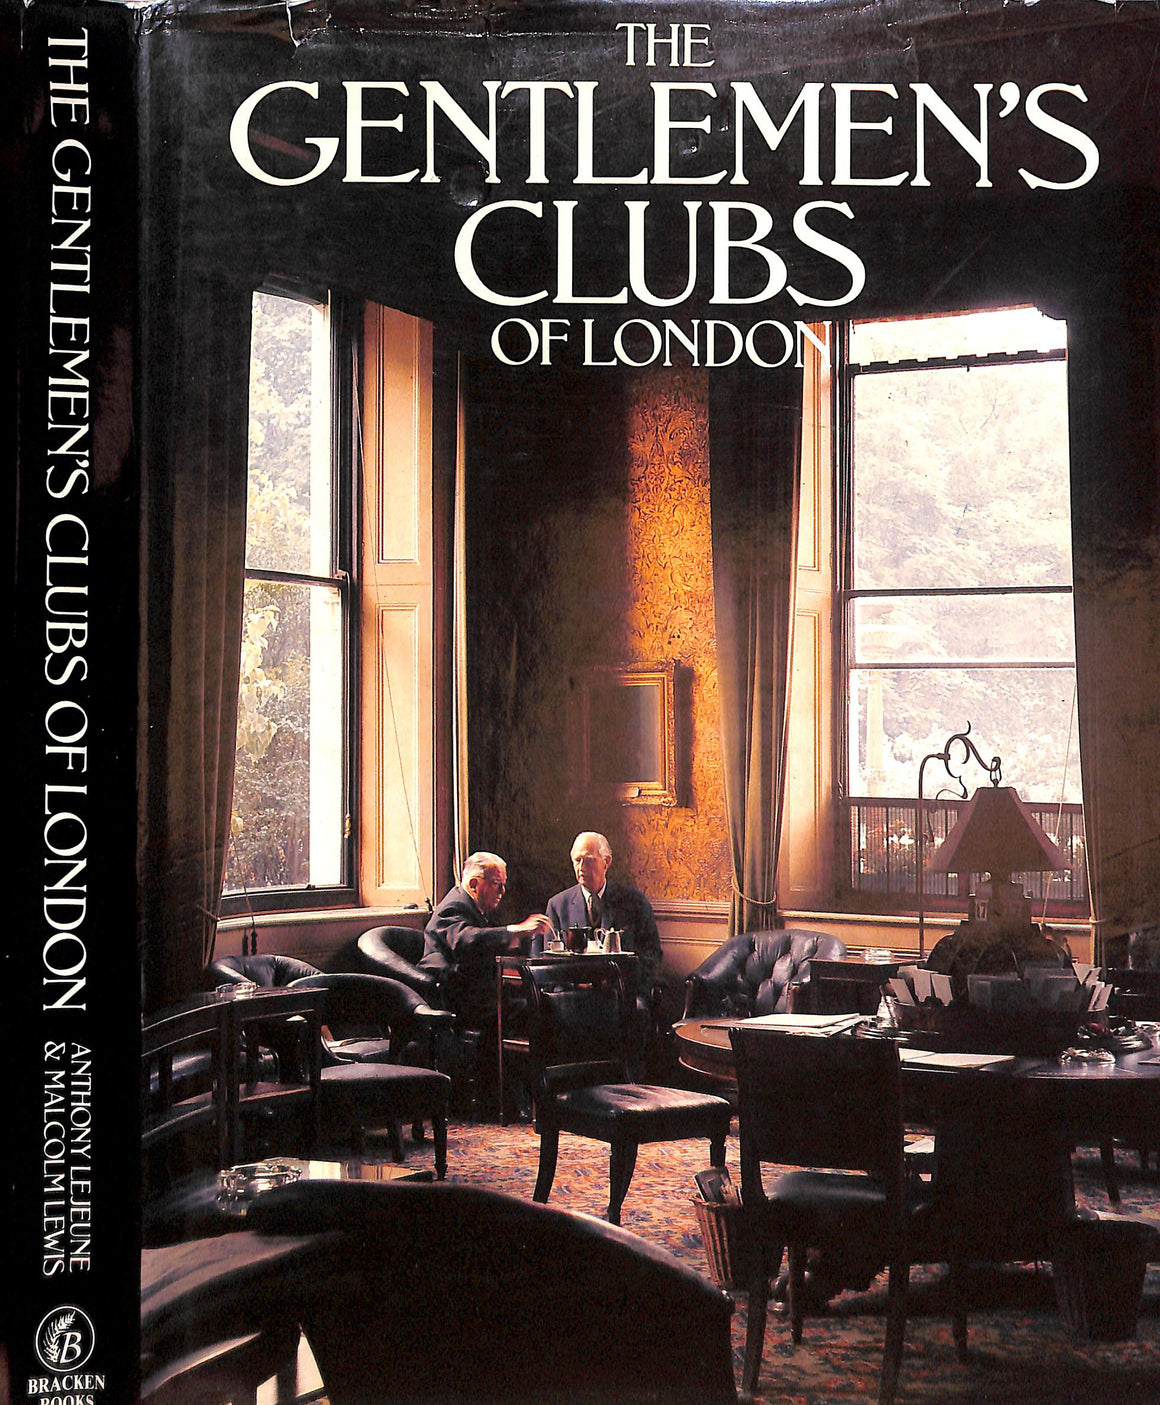 "The Gentlemen's Clubs Of London" 1984 LEJEUNE, Anthony [text by] & LEWIS, Malcolm [photographs by] (SOLD)